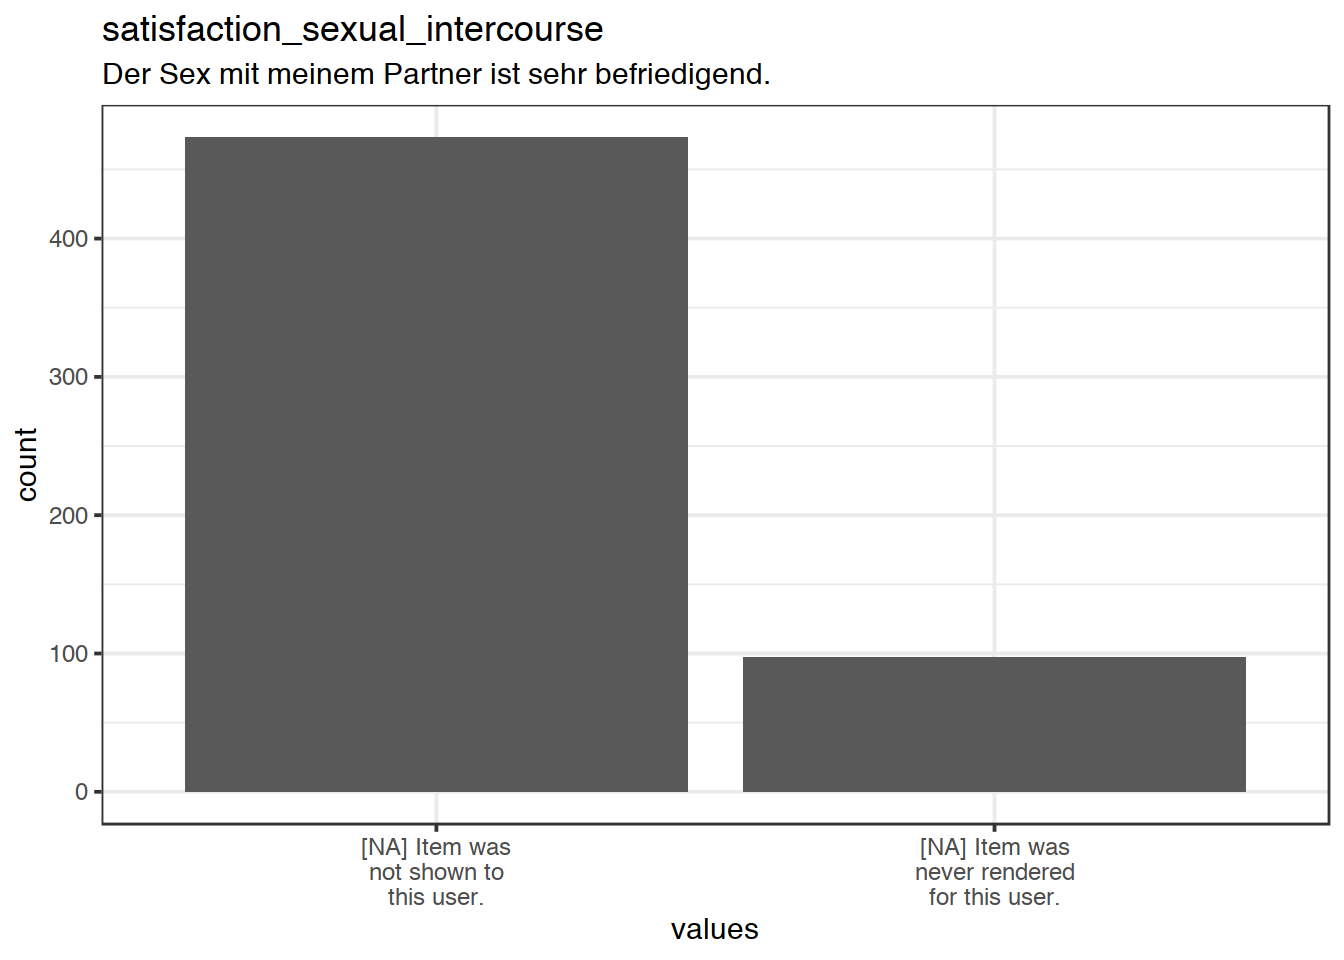 Plot of missing values for satisfaction_sexual_intercourse